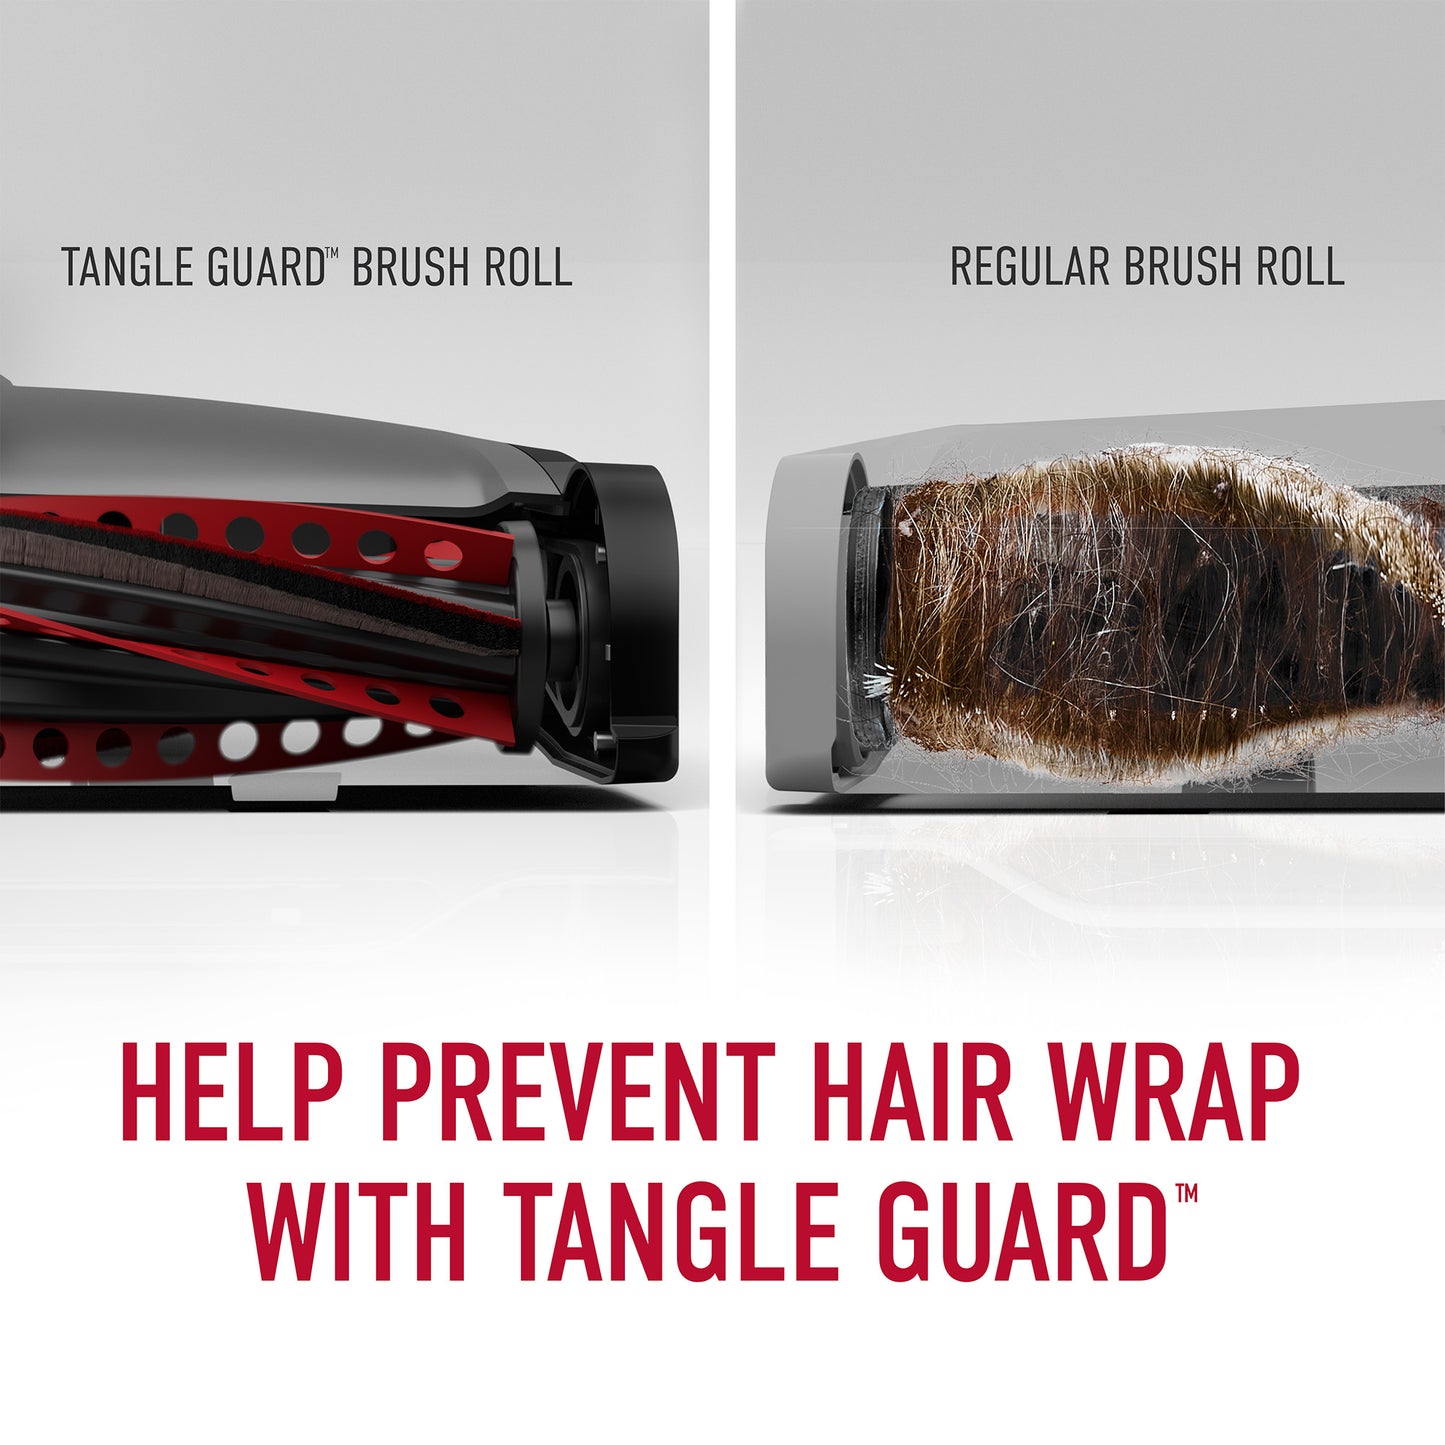 Comparison of tangle guard brush roll and a regular brush roll, demonstrating how Hoover's tangle guard technology helps prevent hair wrap